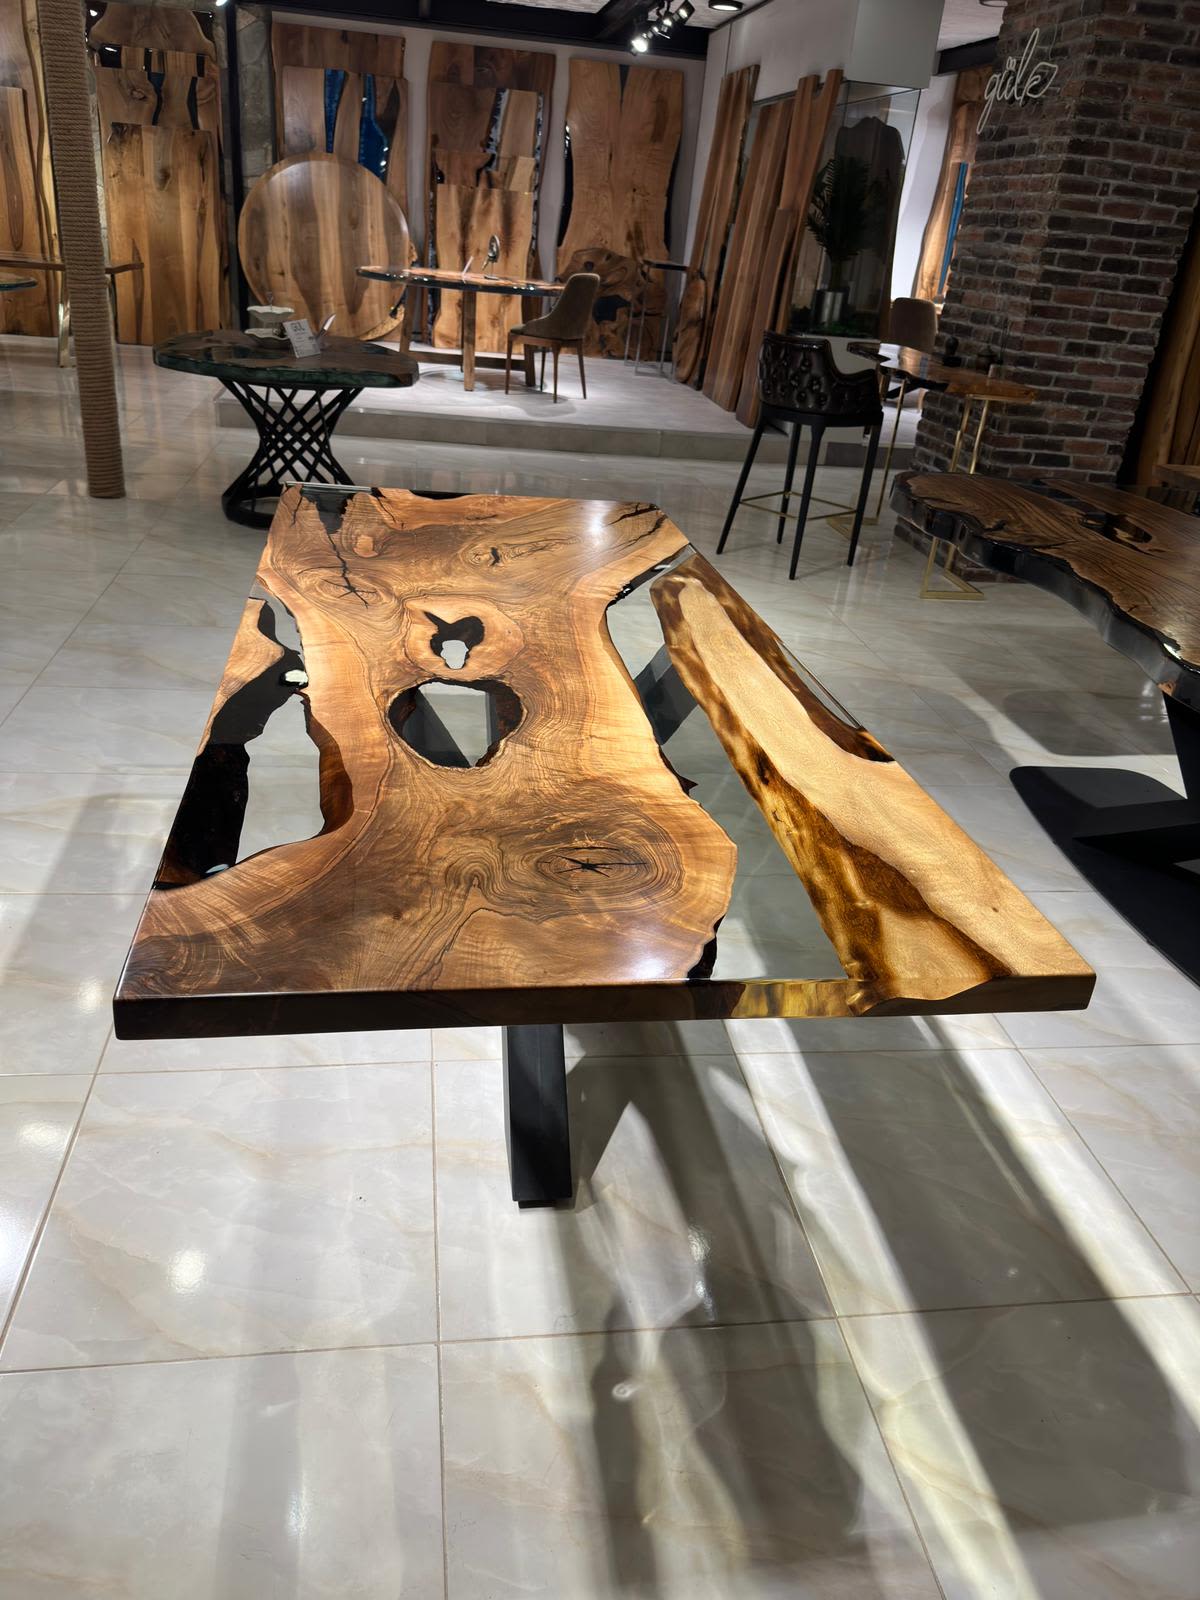 Live Edge Epoxy Resin Table Top / Made To Order by Gül Natural Furniture at  Washington Square Park, New York